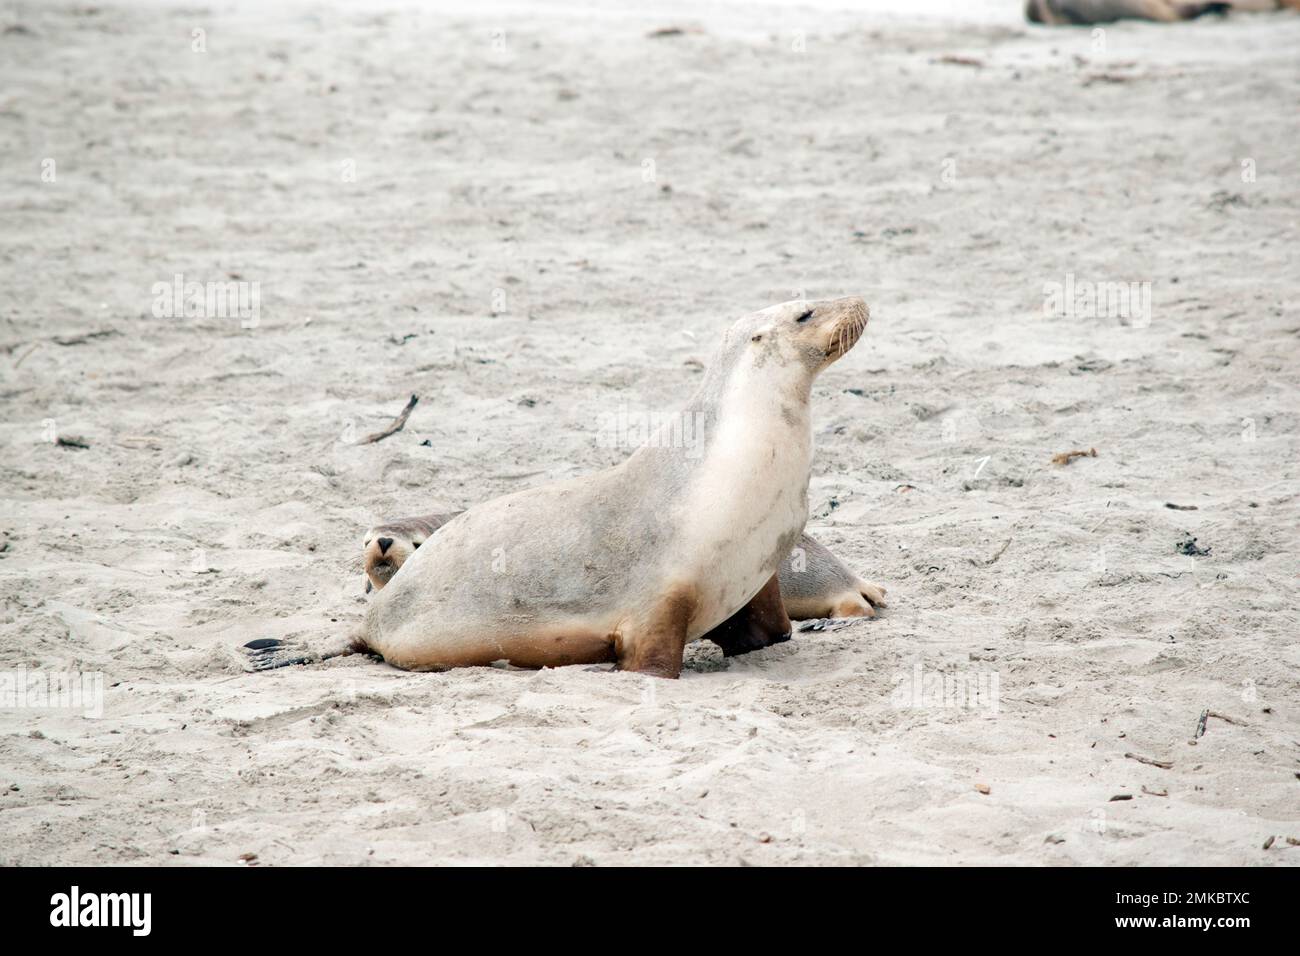 the sea lion covers its body with sand to keep warm Stock Photo